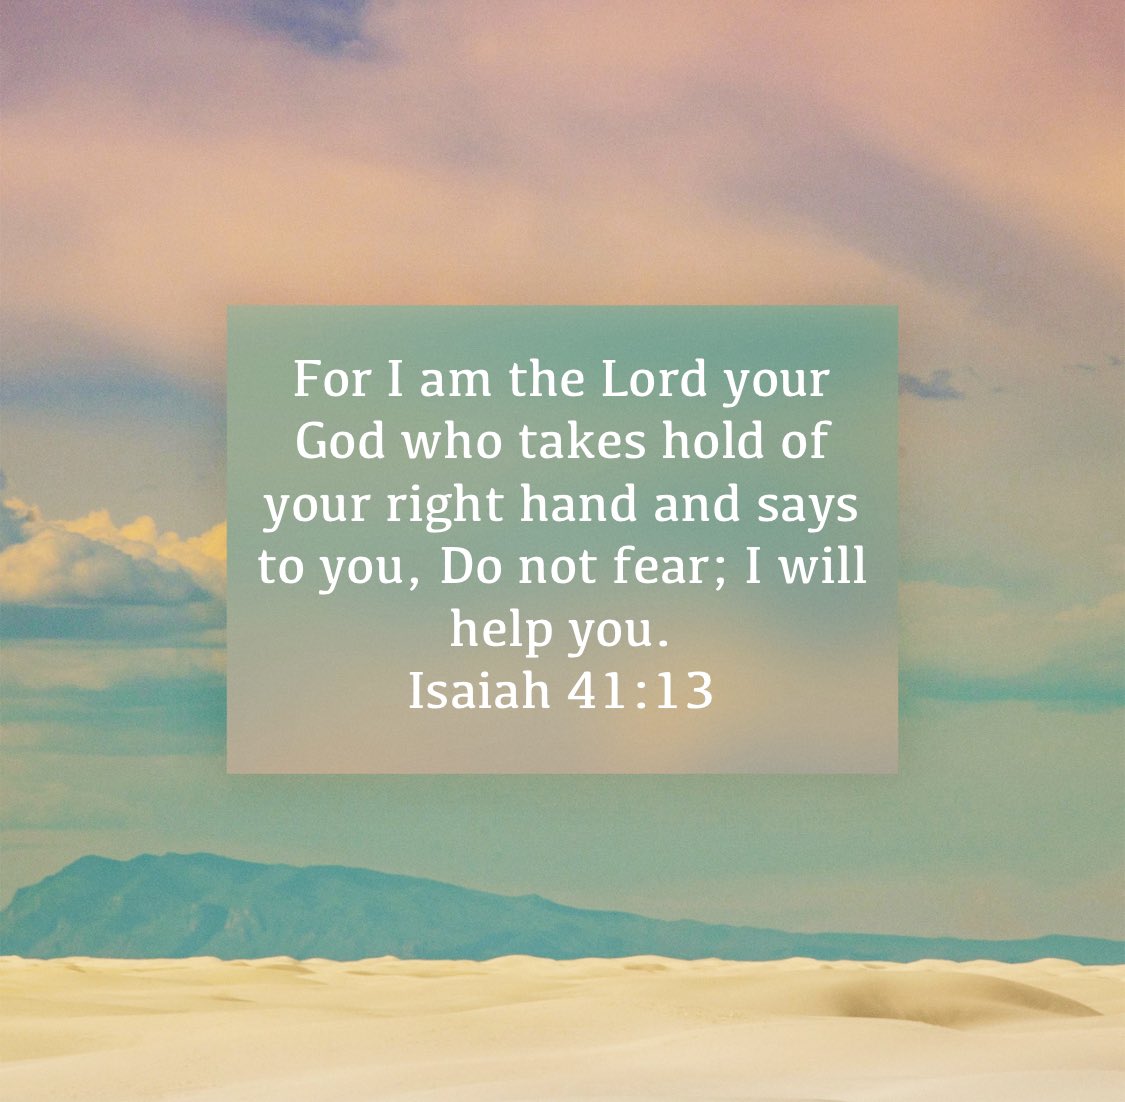 “For I am the Lord your God who takes hold of your right hand and says to you, Do not fear; I will help you.”
Isaiah 41:13 NIV

bible.com/bible/111/isa.…

#Amen 🙏🏼 #GodIsGood 🙌🏼
#DoNotFear #TrustGodsPlan #HeHasMyHand 

#InfernoMob 🔥 
#PatriotsCross ✝️
#UnitedWeStand 🗽
#UWS369 🇺🇸…